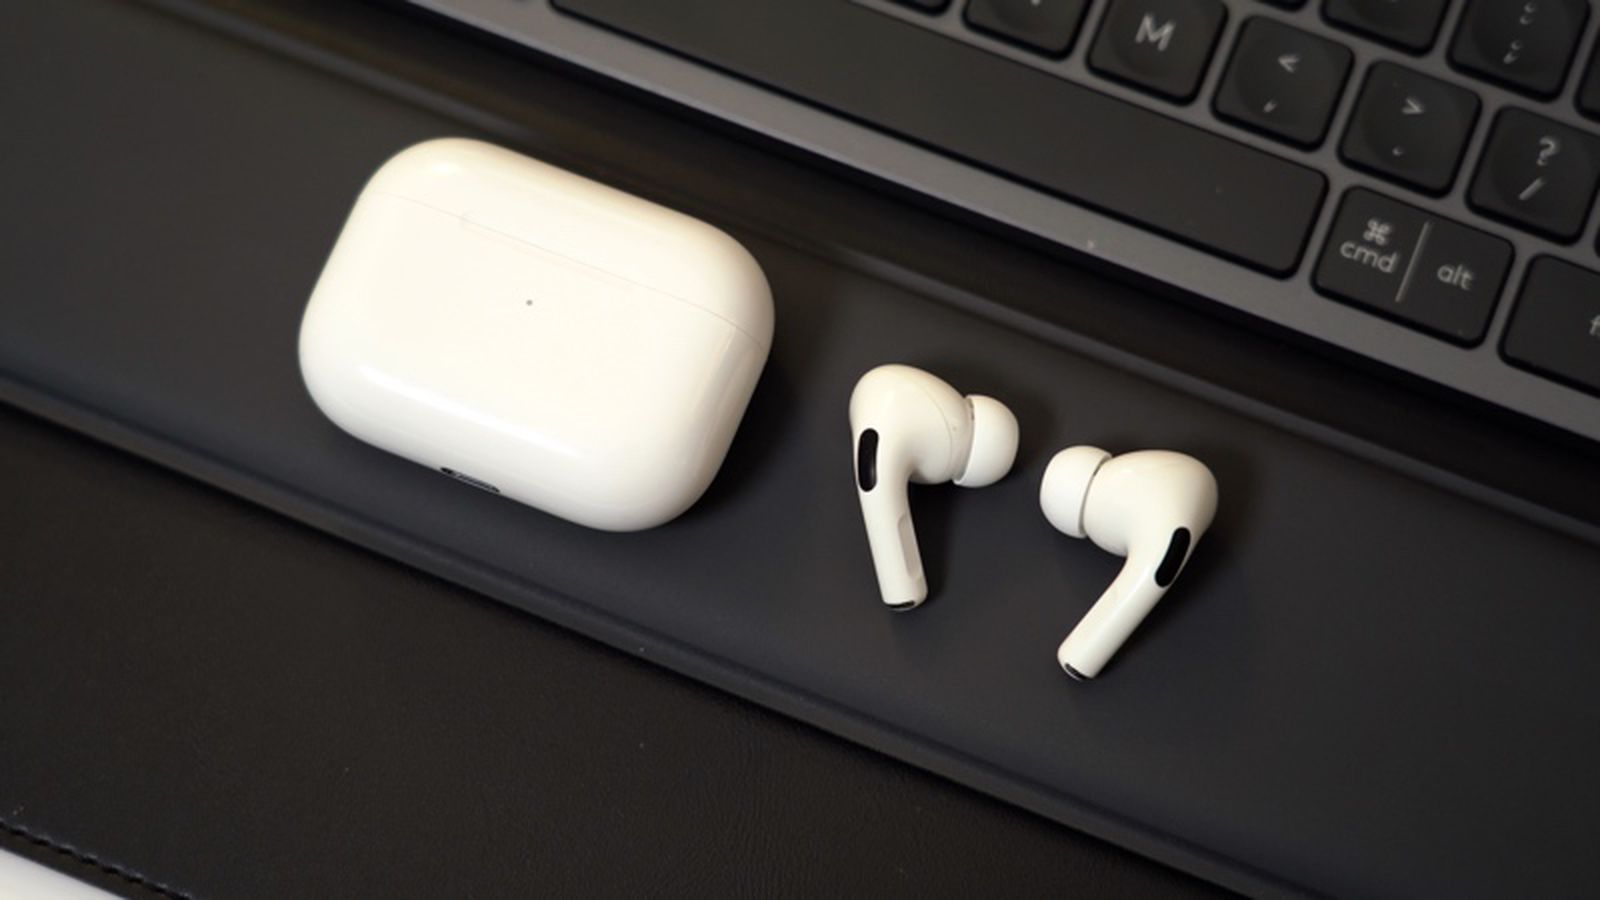 New AirPods Pro and iPhone SE to be launched in April 2021